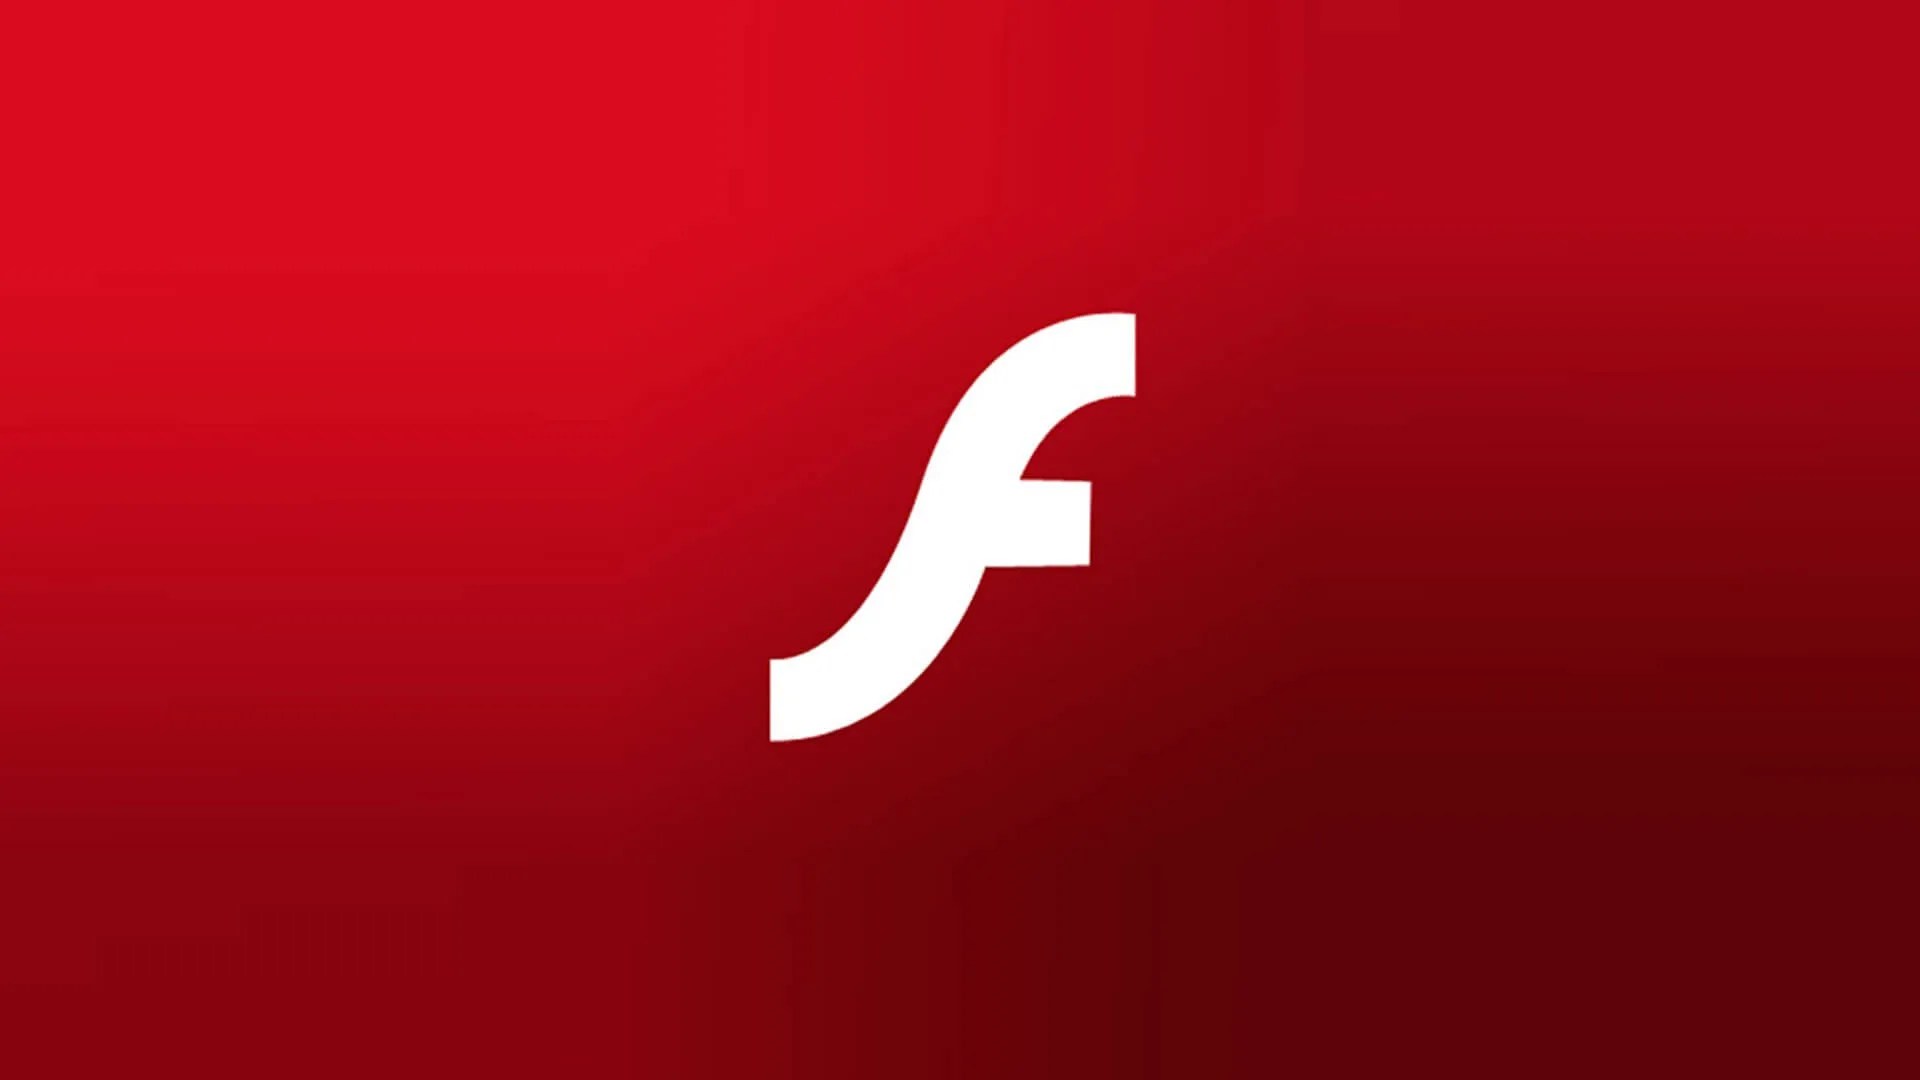 How to Test Adobe Flash Player